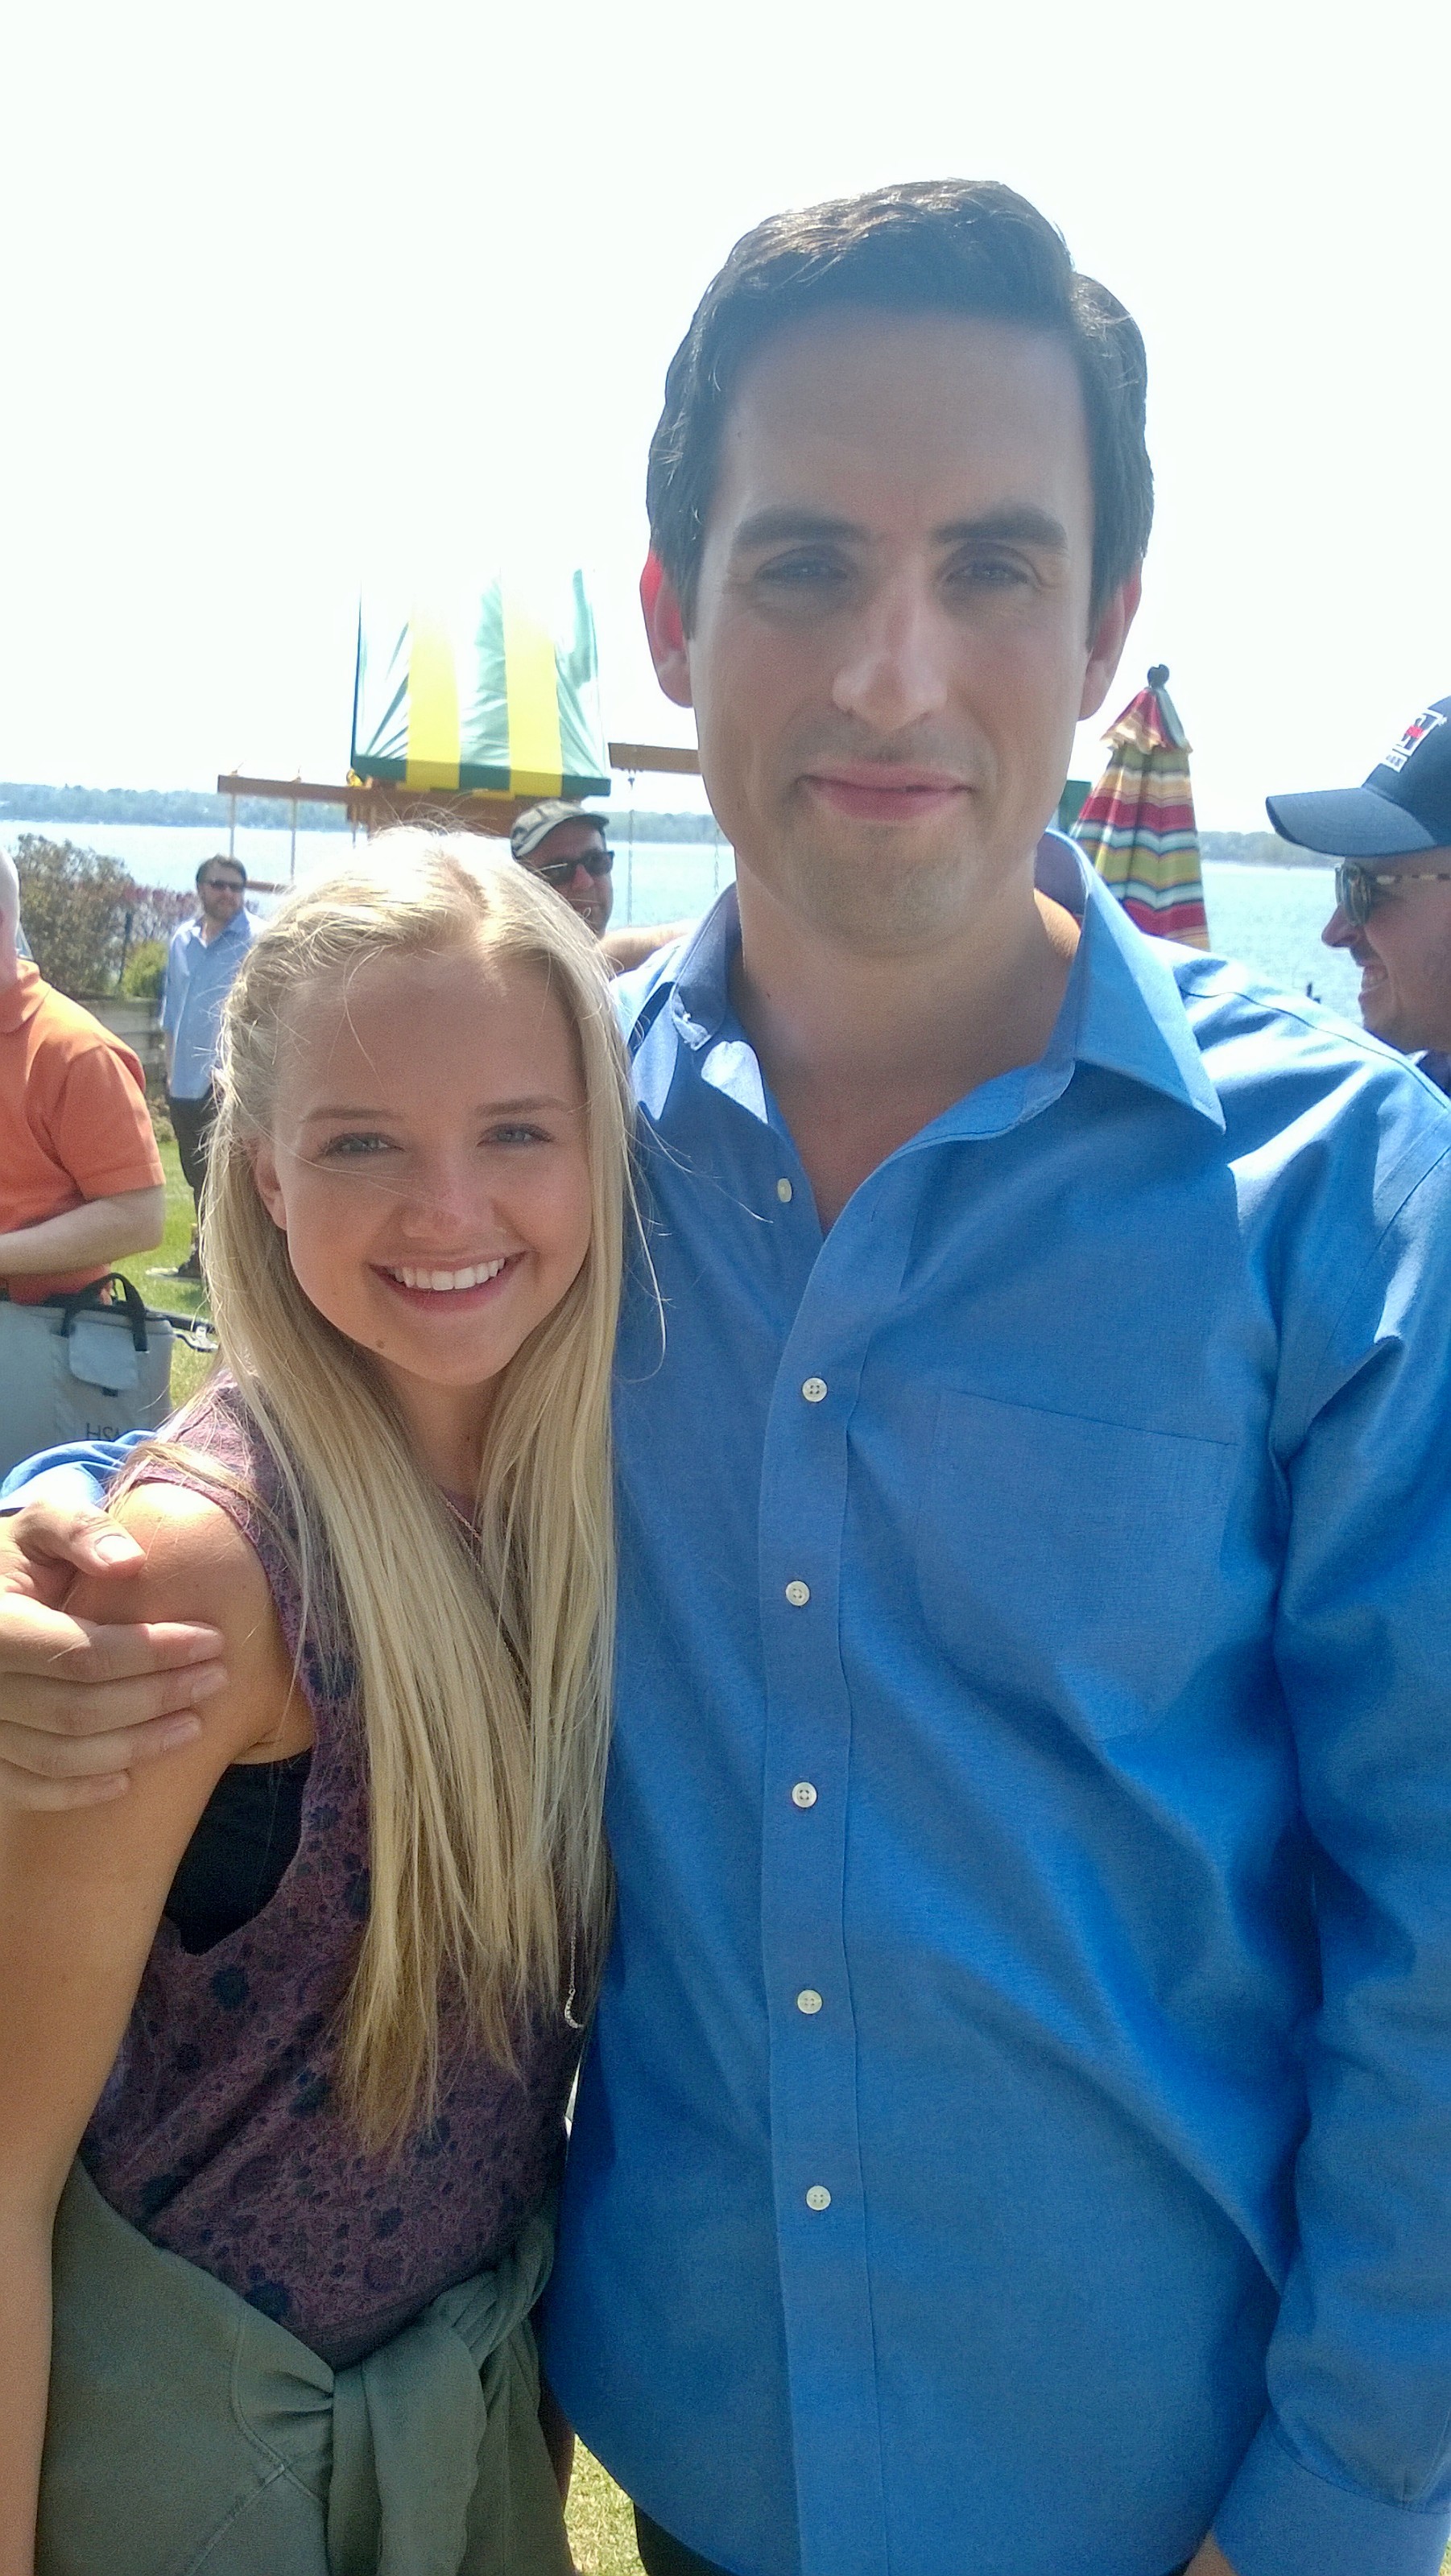 On the set of Royal pains with Paulo Constanzo